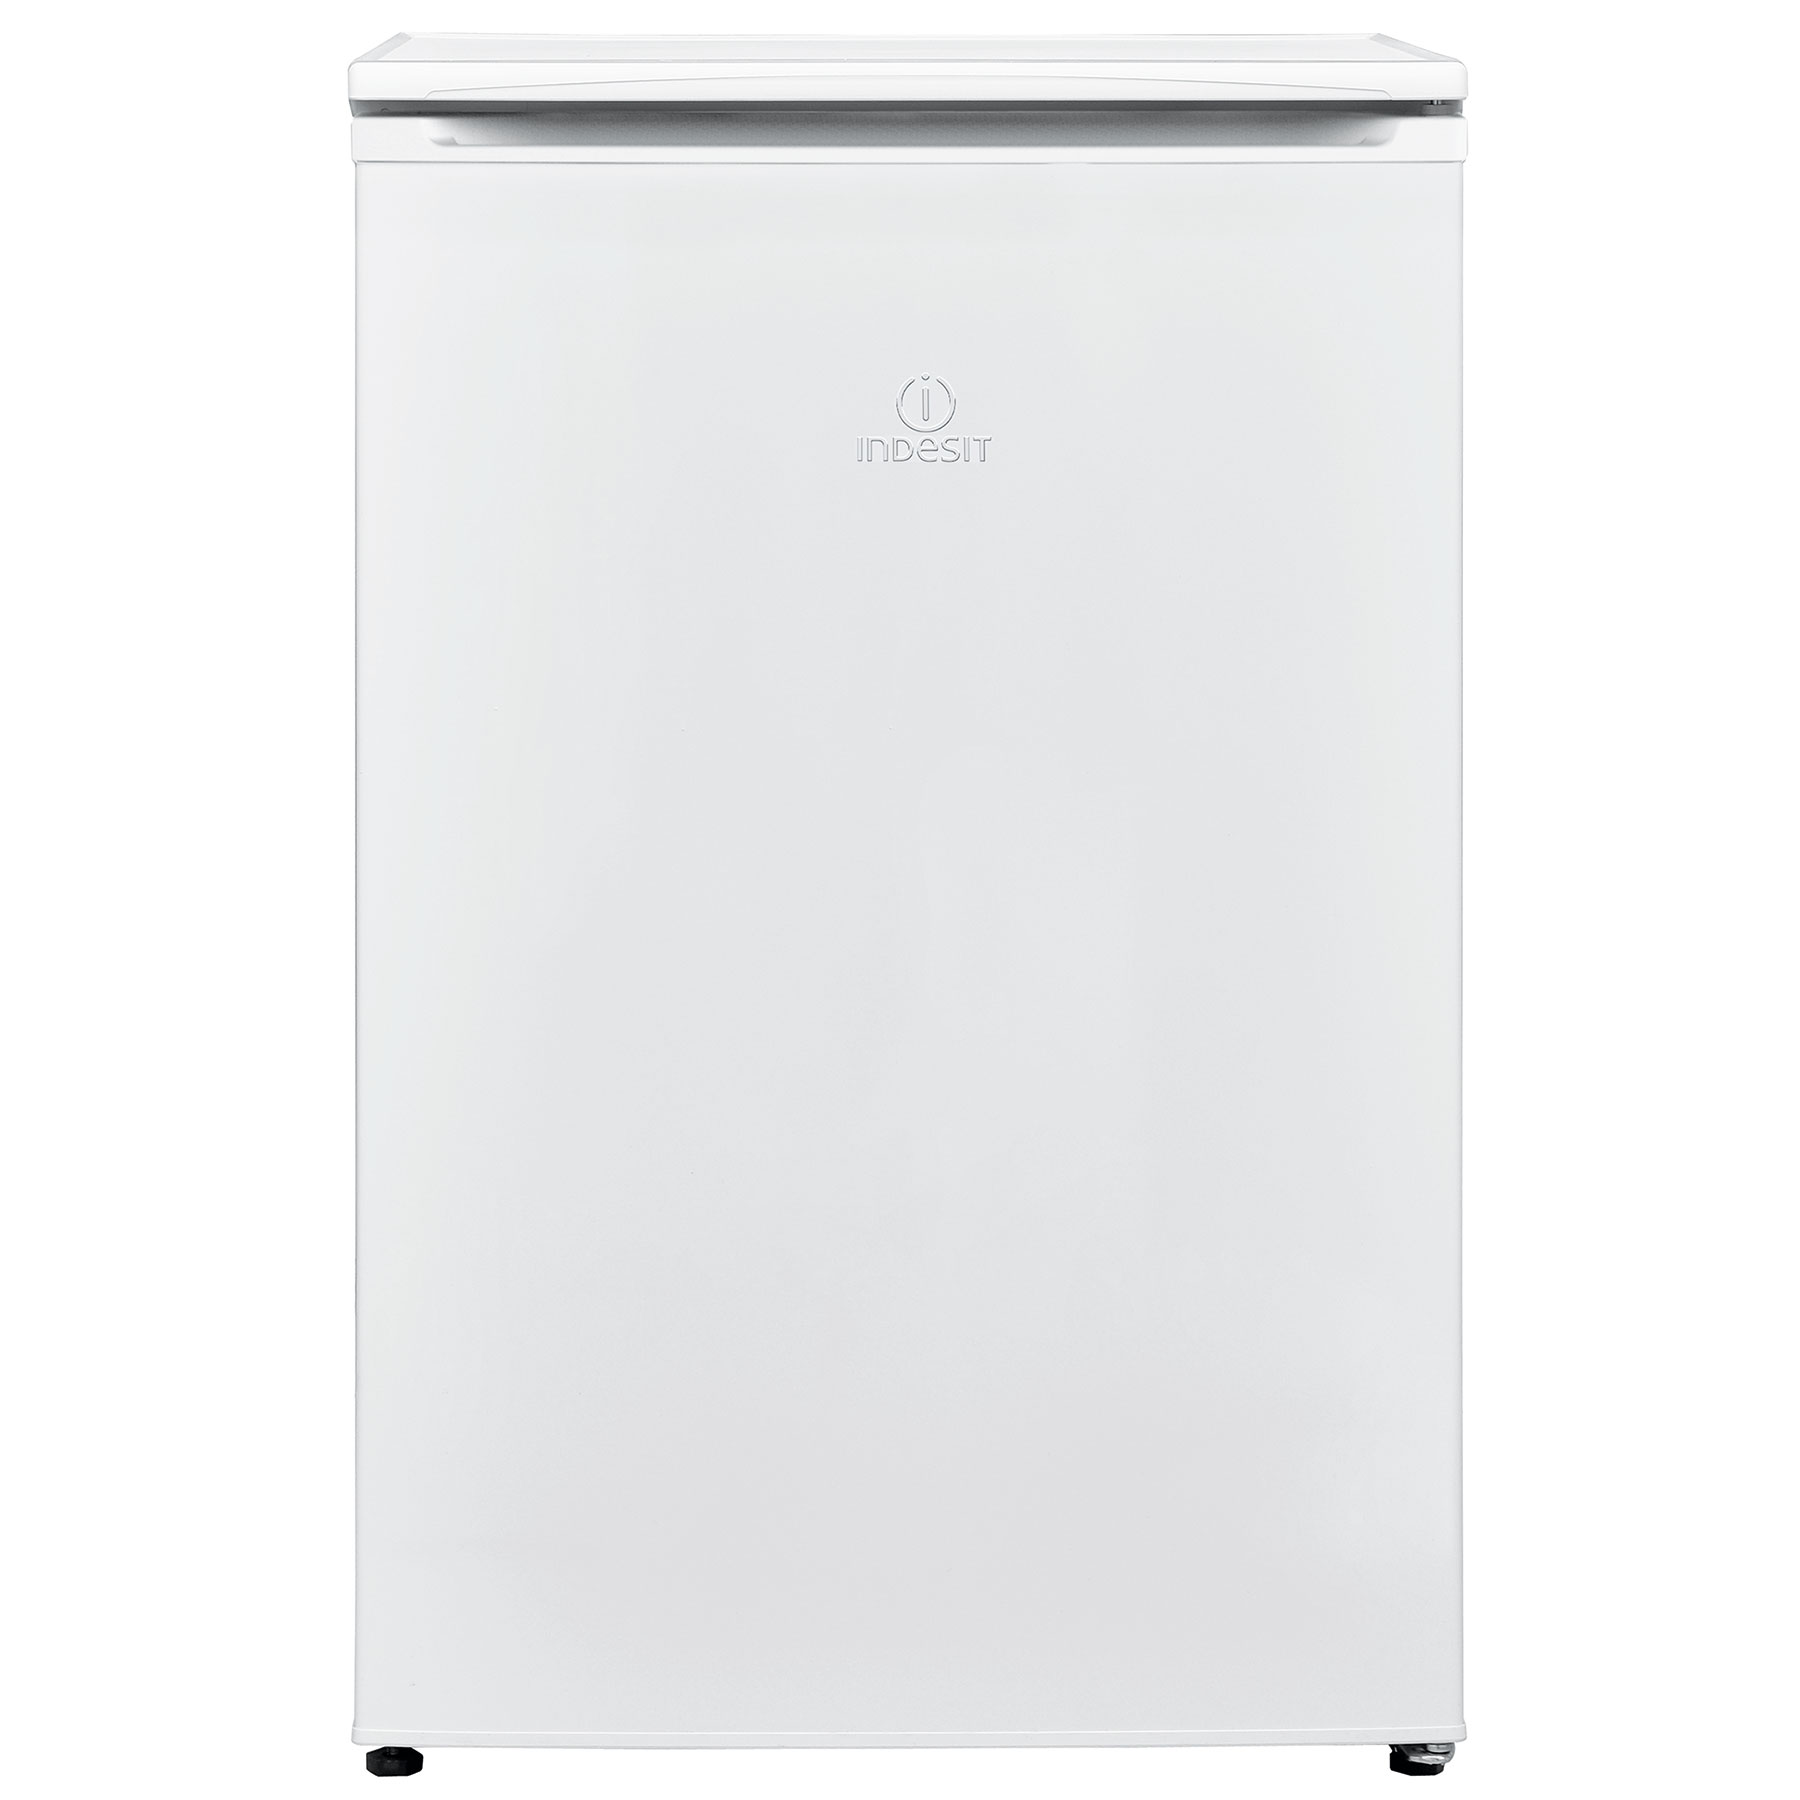 Image of Indesit I55ZM1120W 55cm Undercounter Freezer in White E Rated 103L